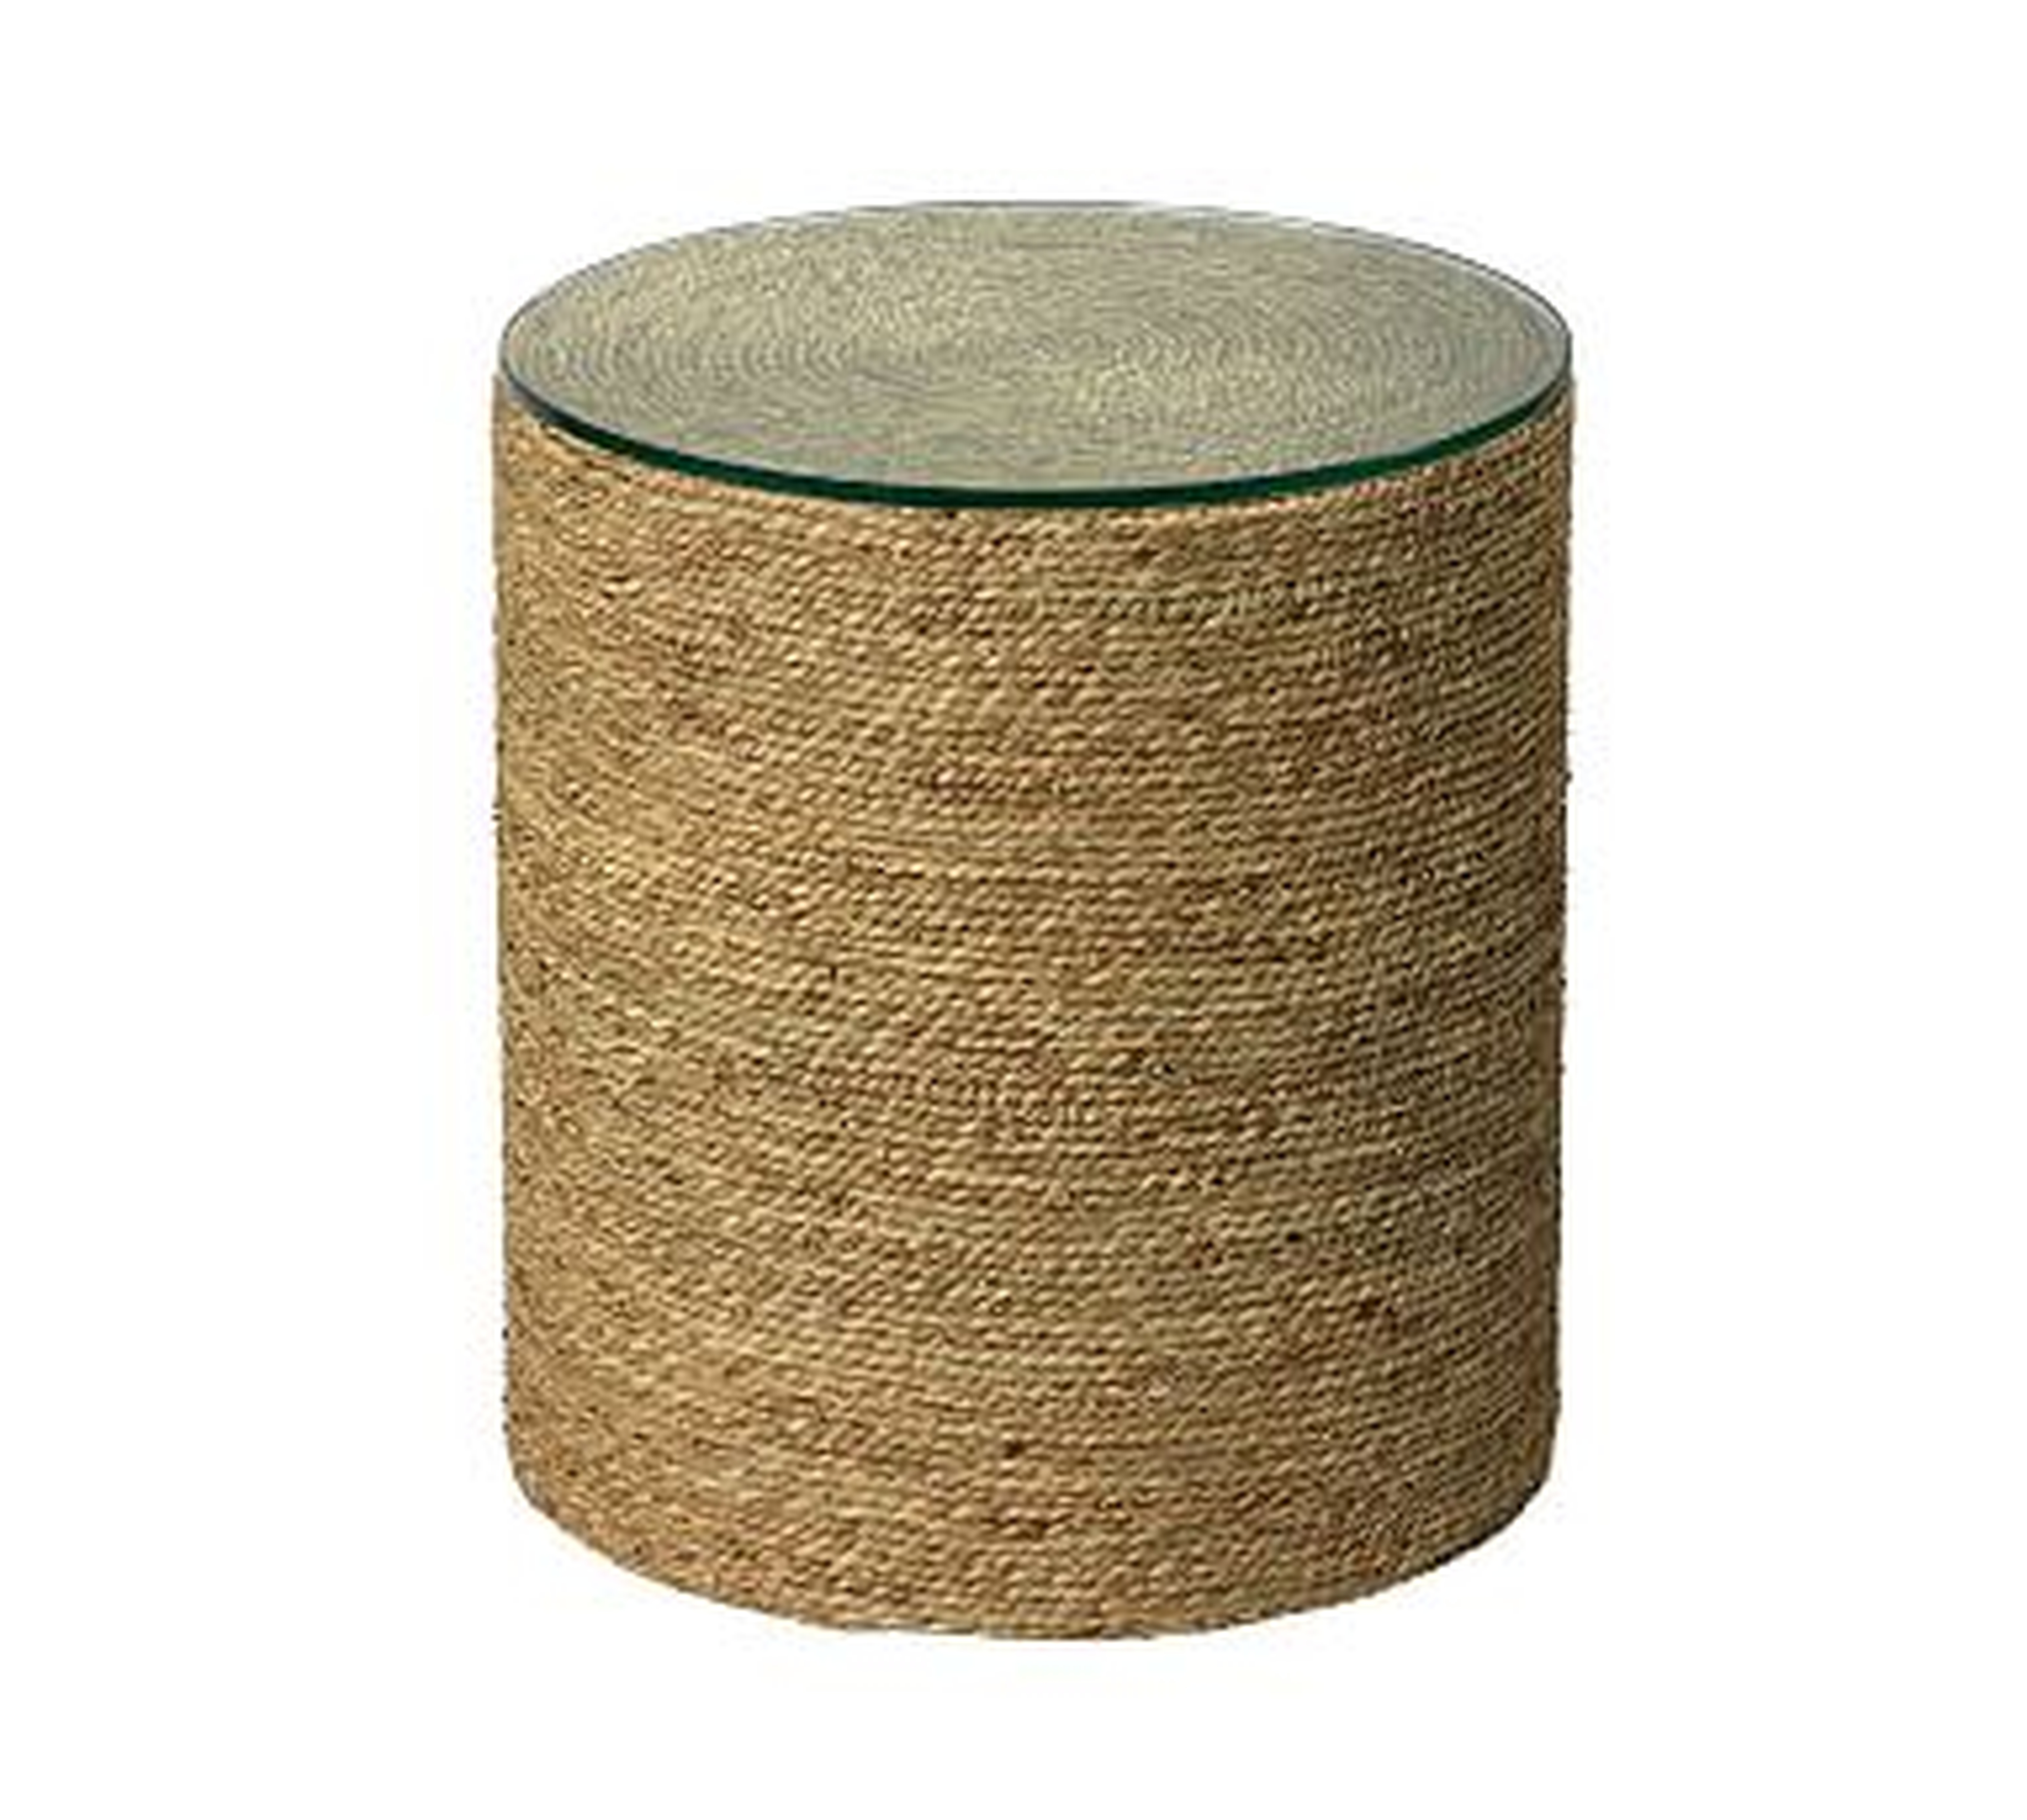 Dixon Seagrass Round End Table, Natural - Pottery Barn